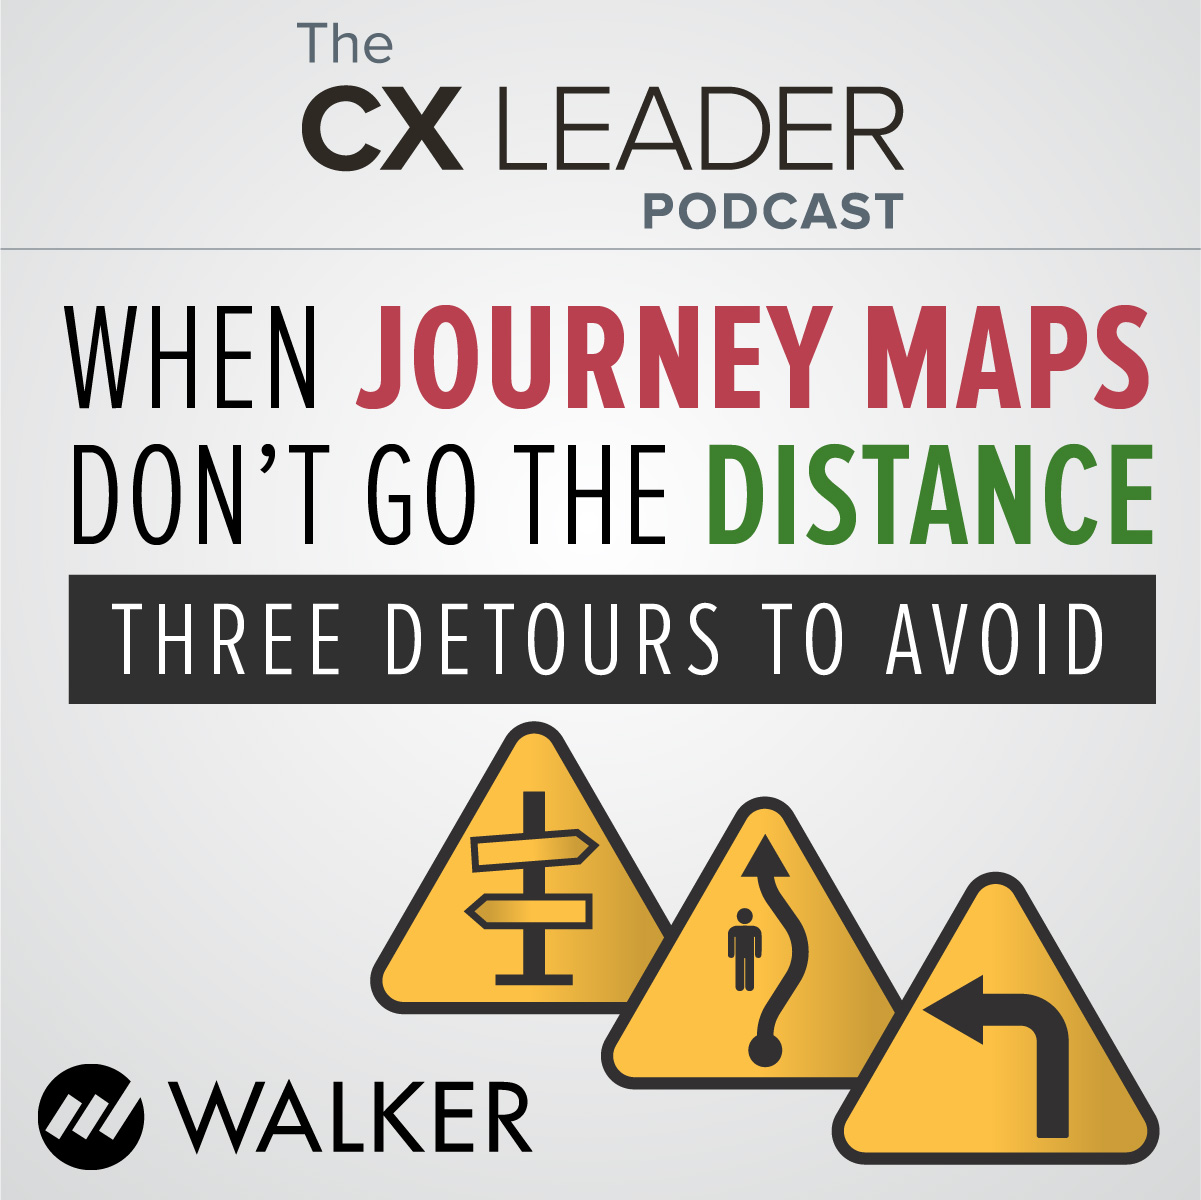 So you have a journey map… what now?